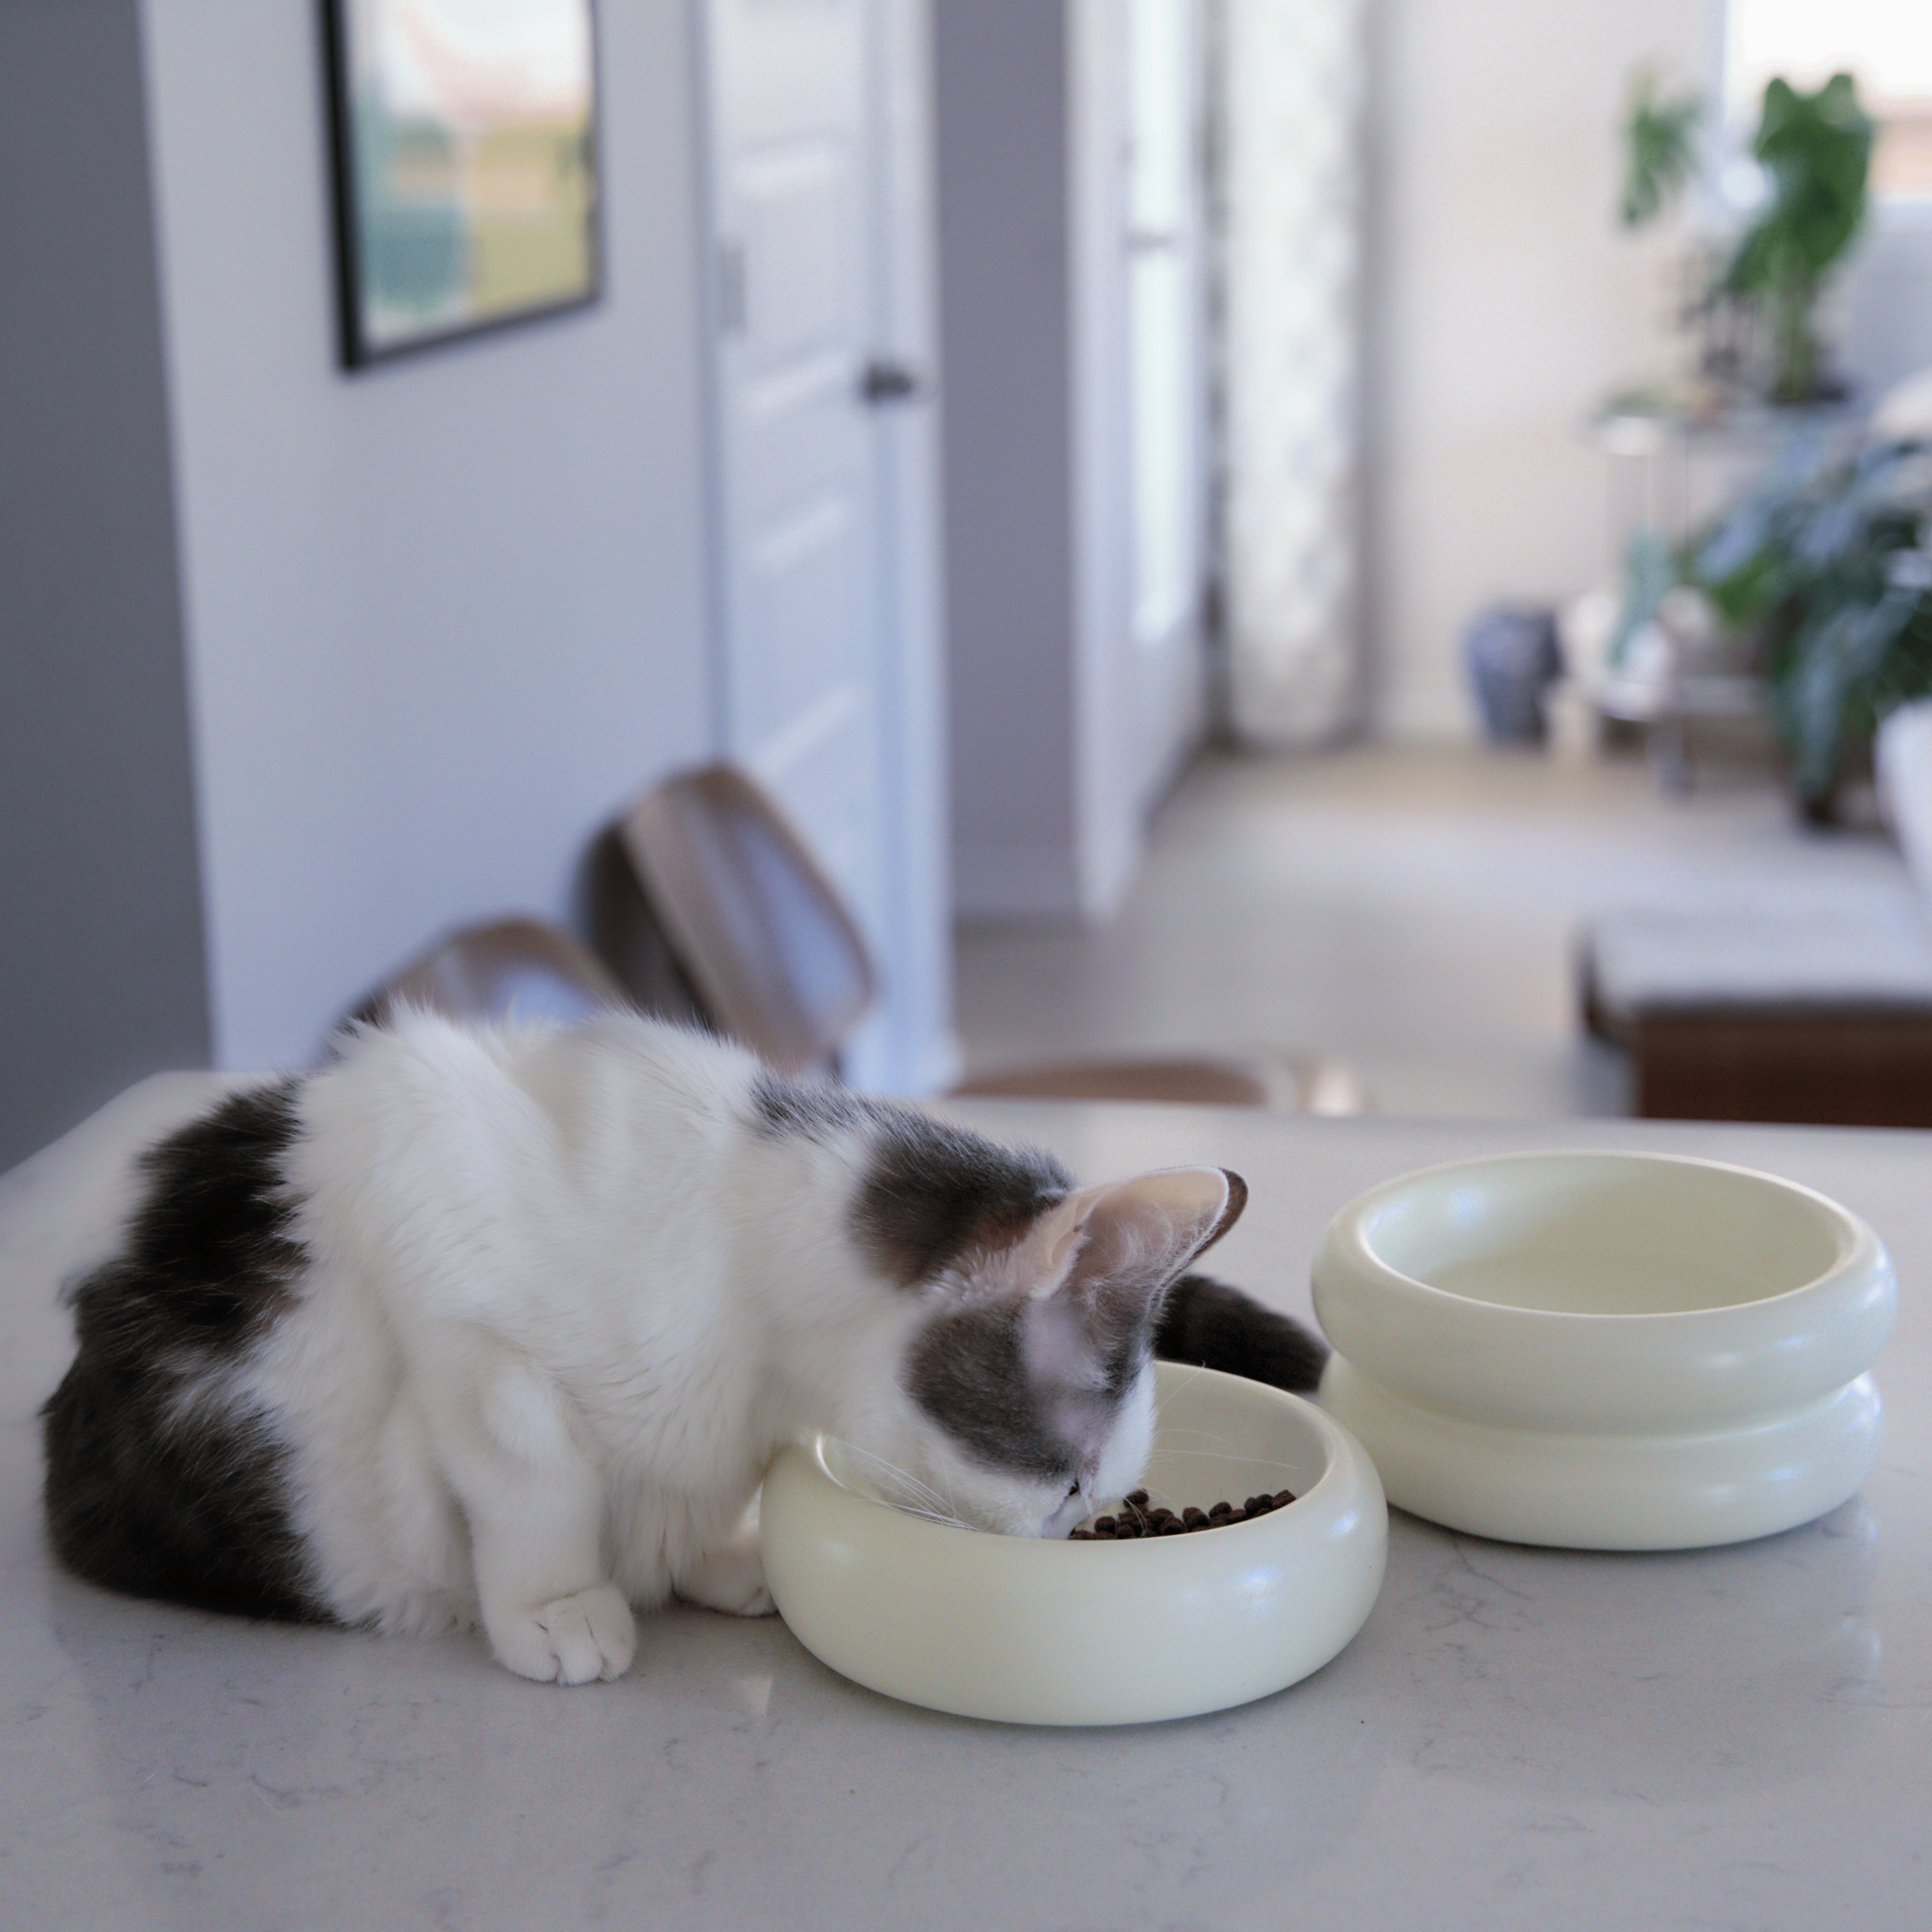 side profile of cat eating from white modern cat bowls on kitchen countertop in a modern house